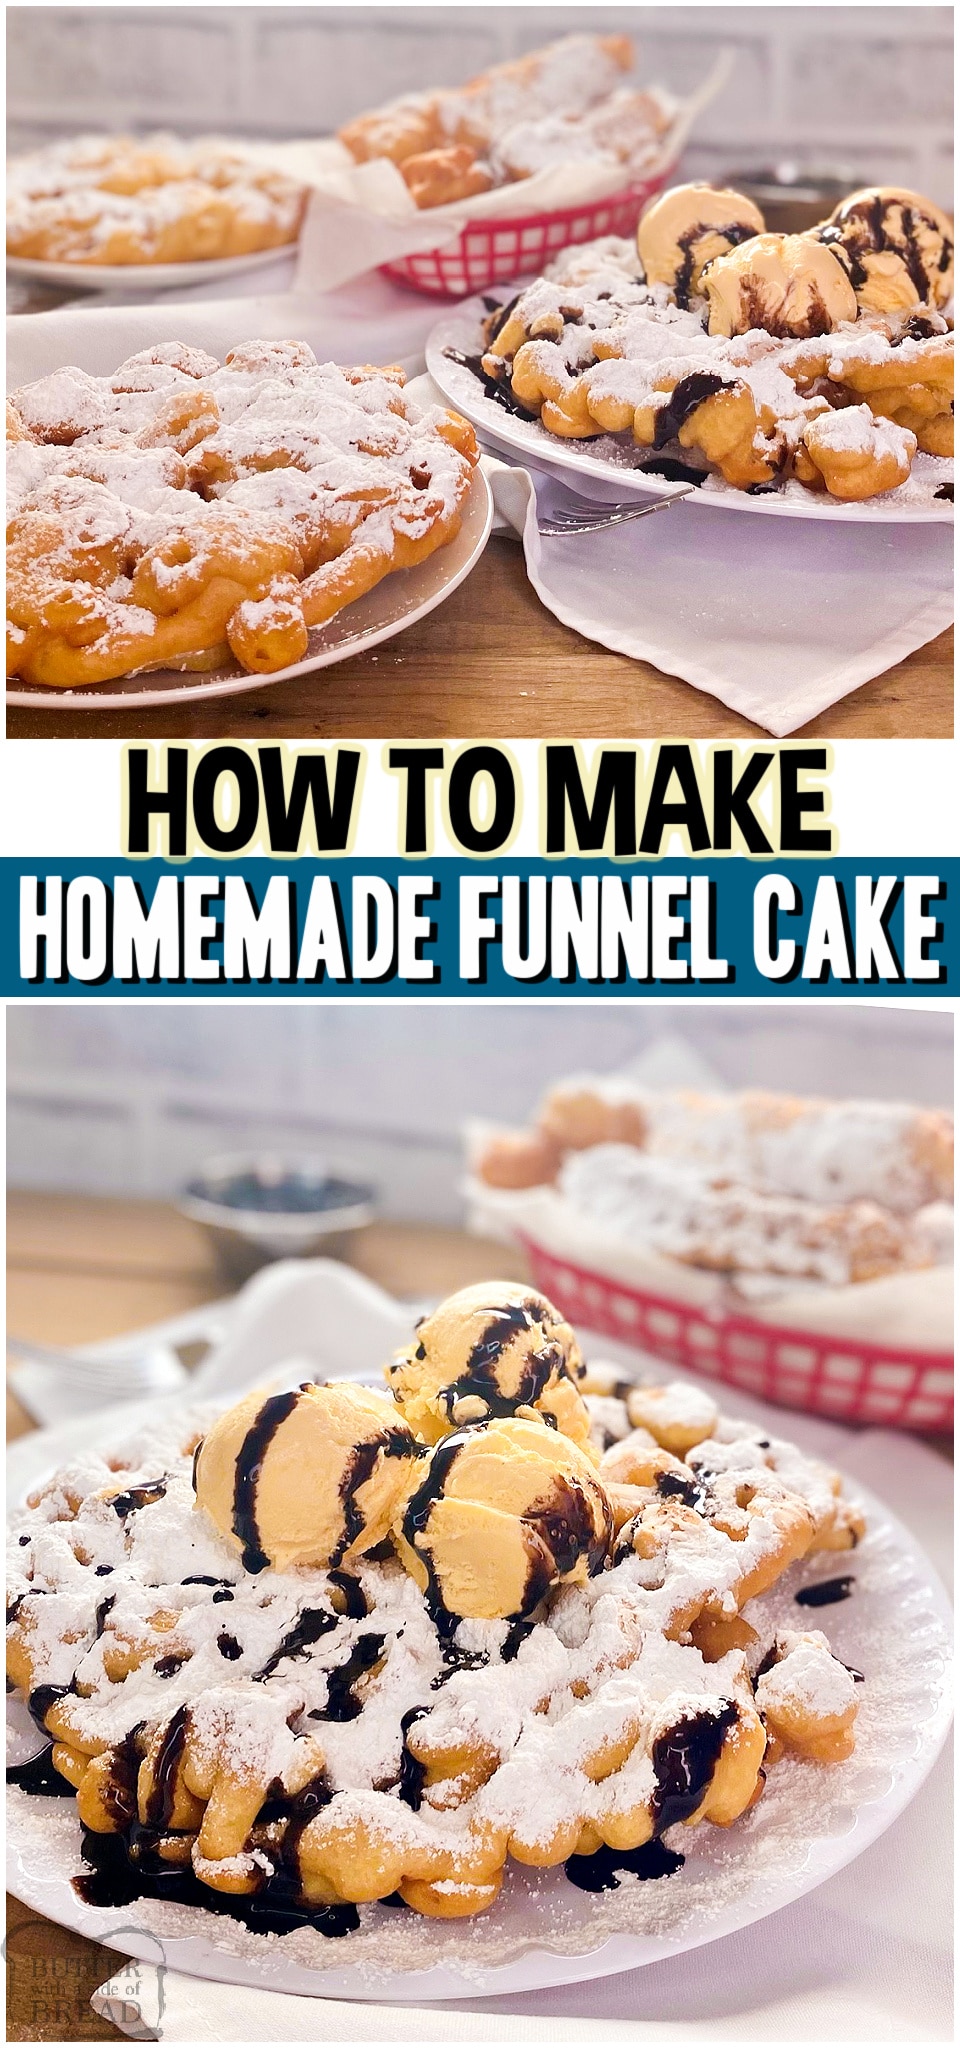 Recipe for How to Make Funnel Cake at home that's simple & delicious! Simple pantry ingredients combine to make these fun homemade funnel cakes. Come see how easy they are to make! 